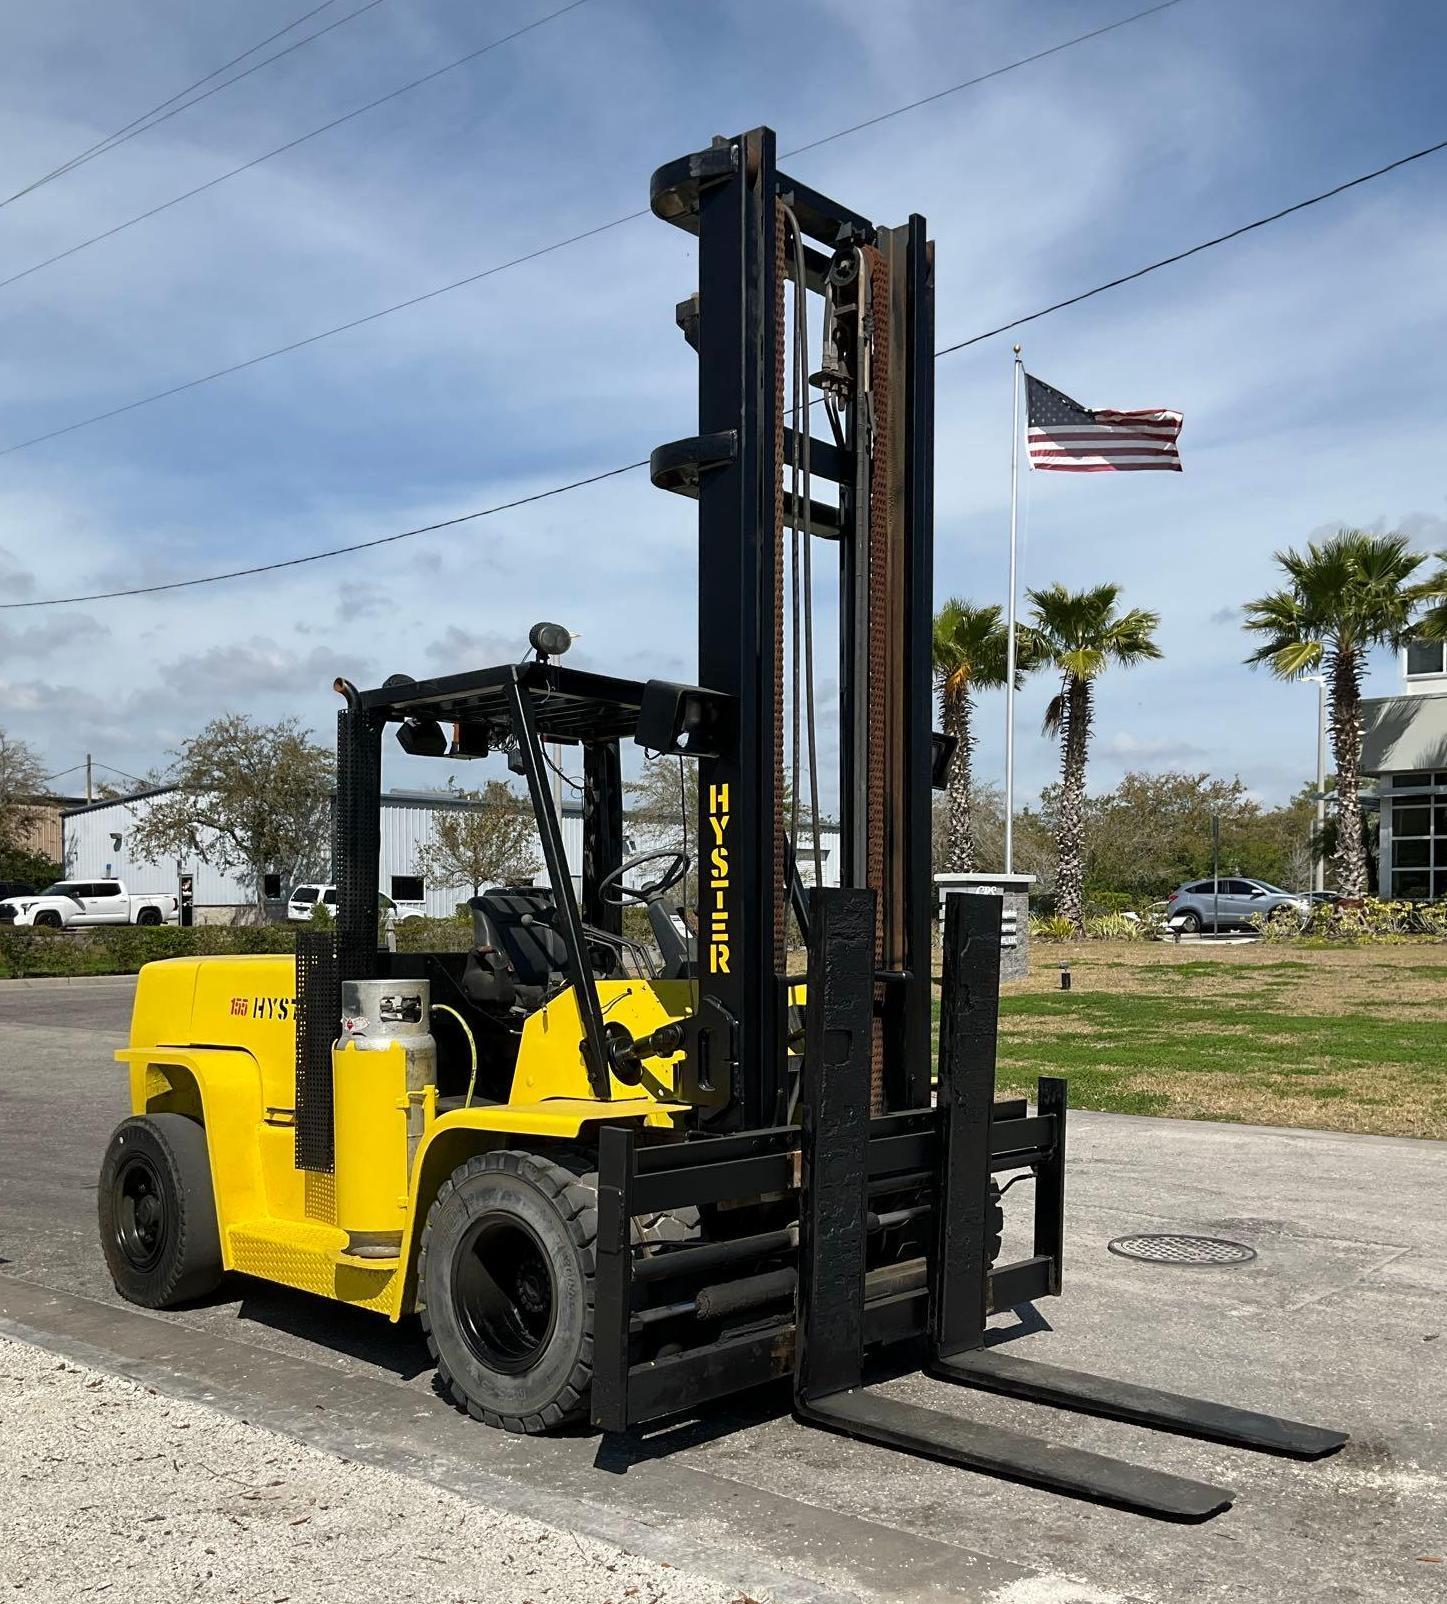 HYSTER FORKLIFT MODEL H155XL2, LP POWERED, APPROX MAX CAPACITY 13500LBS, APPROX MAX HEIGHT 212IN,